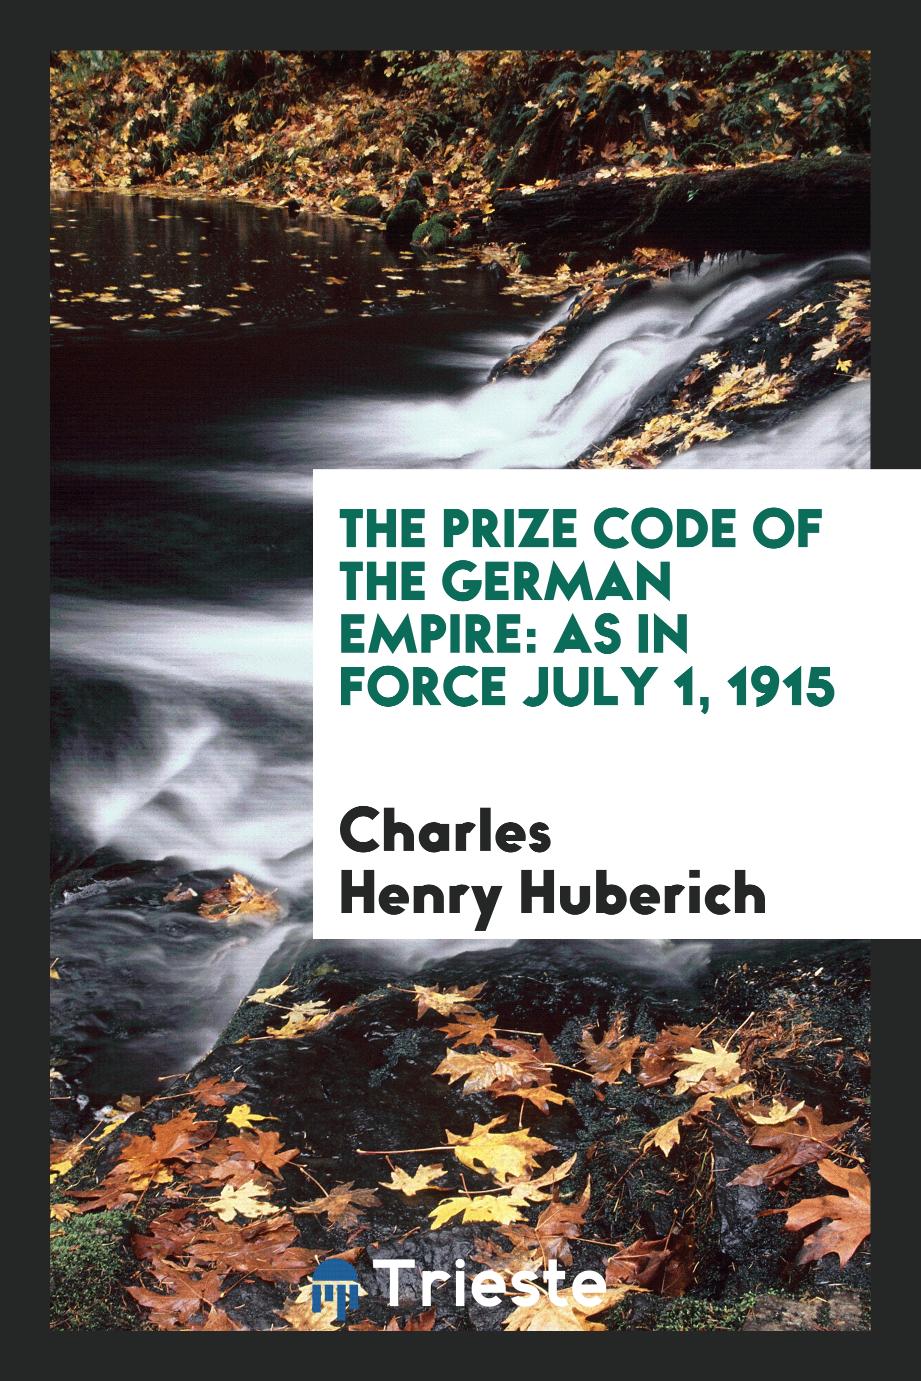 The Prize Code of the German Empire: As in Force July 1, 1915